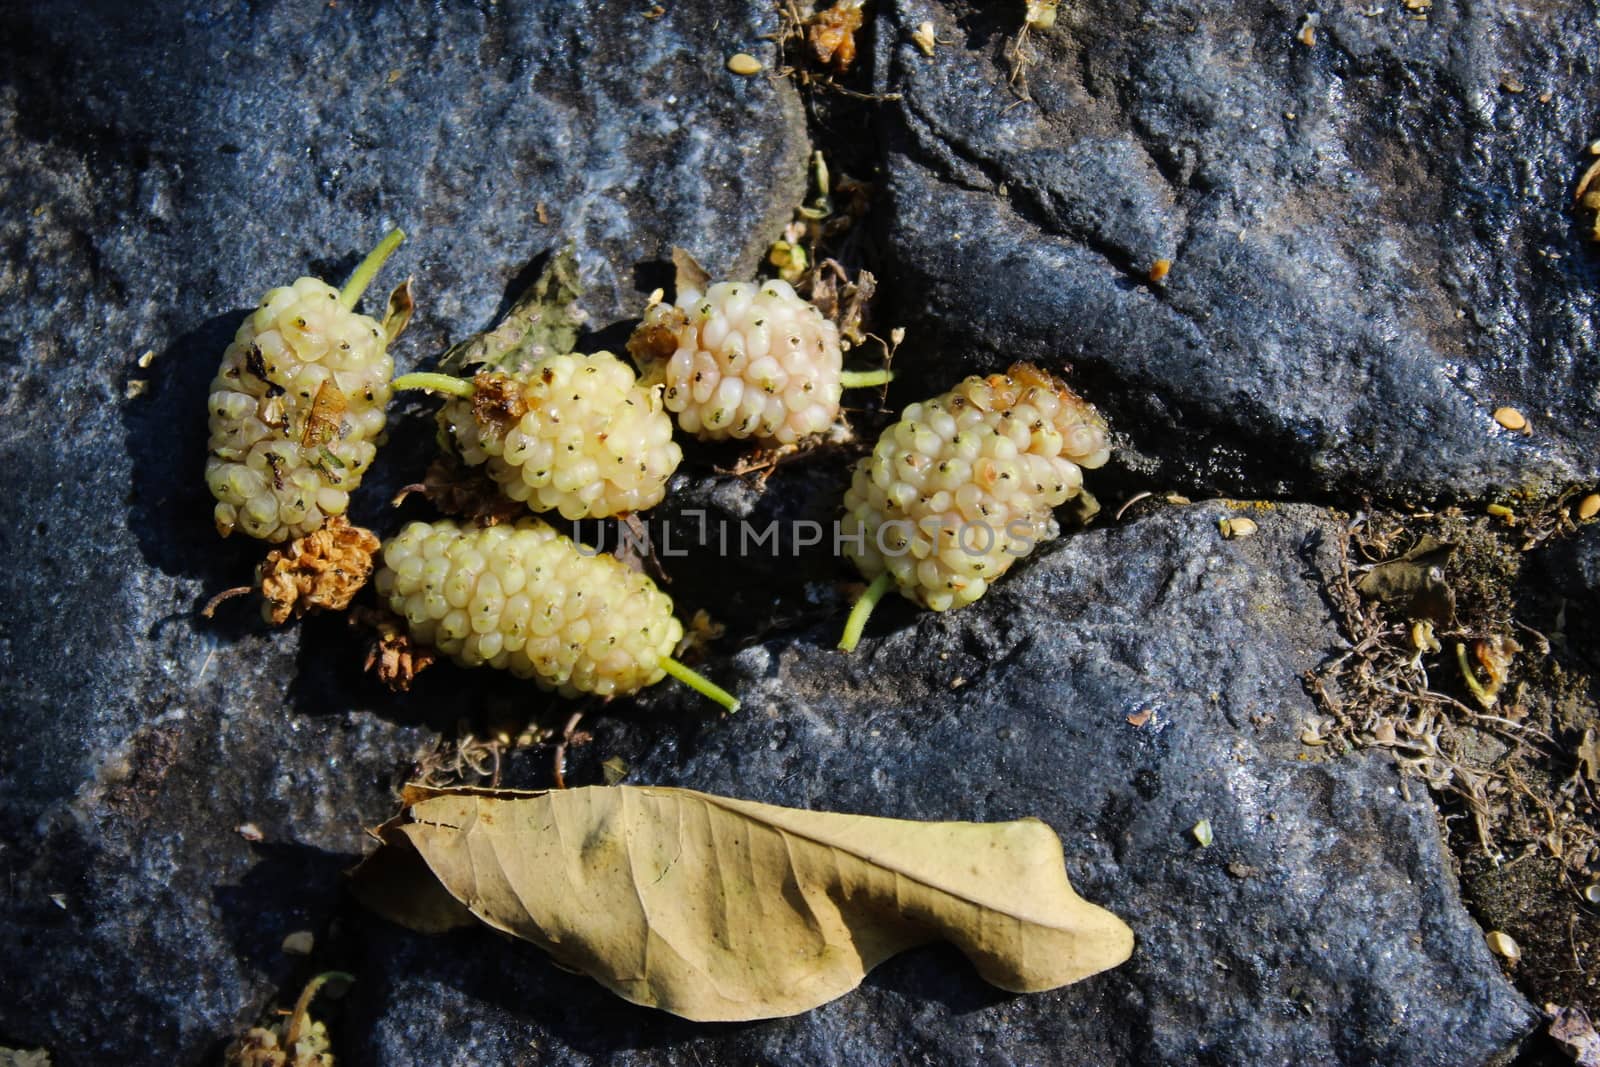 Artistic setting of white mulberry fruits against a dark blue stone background. Morus alba, white mulberry. Beja, Portugal.